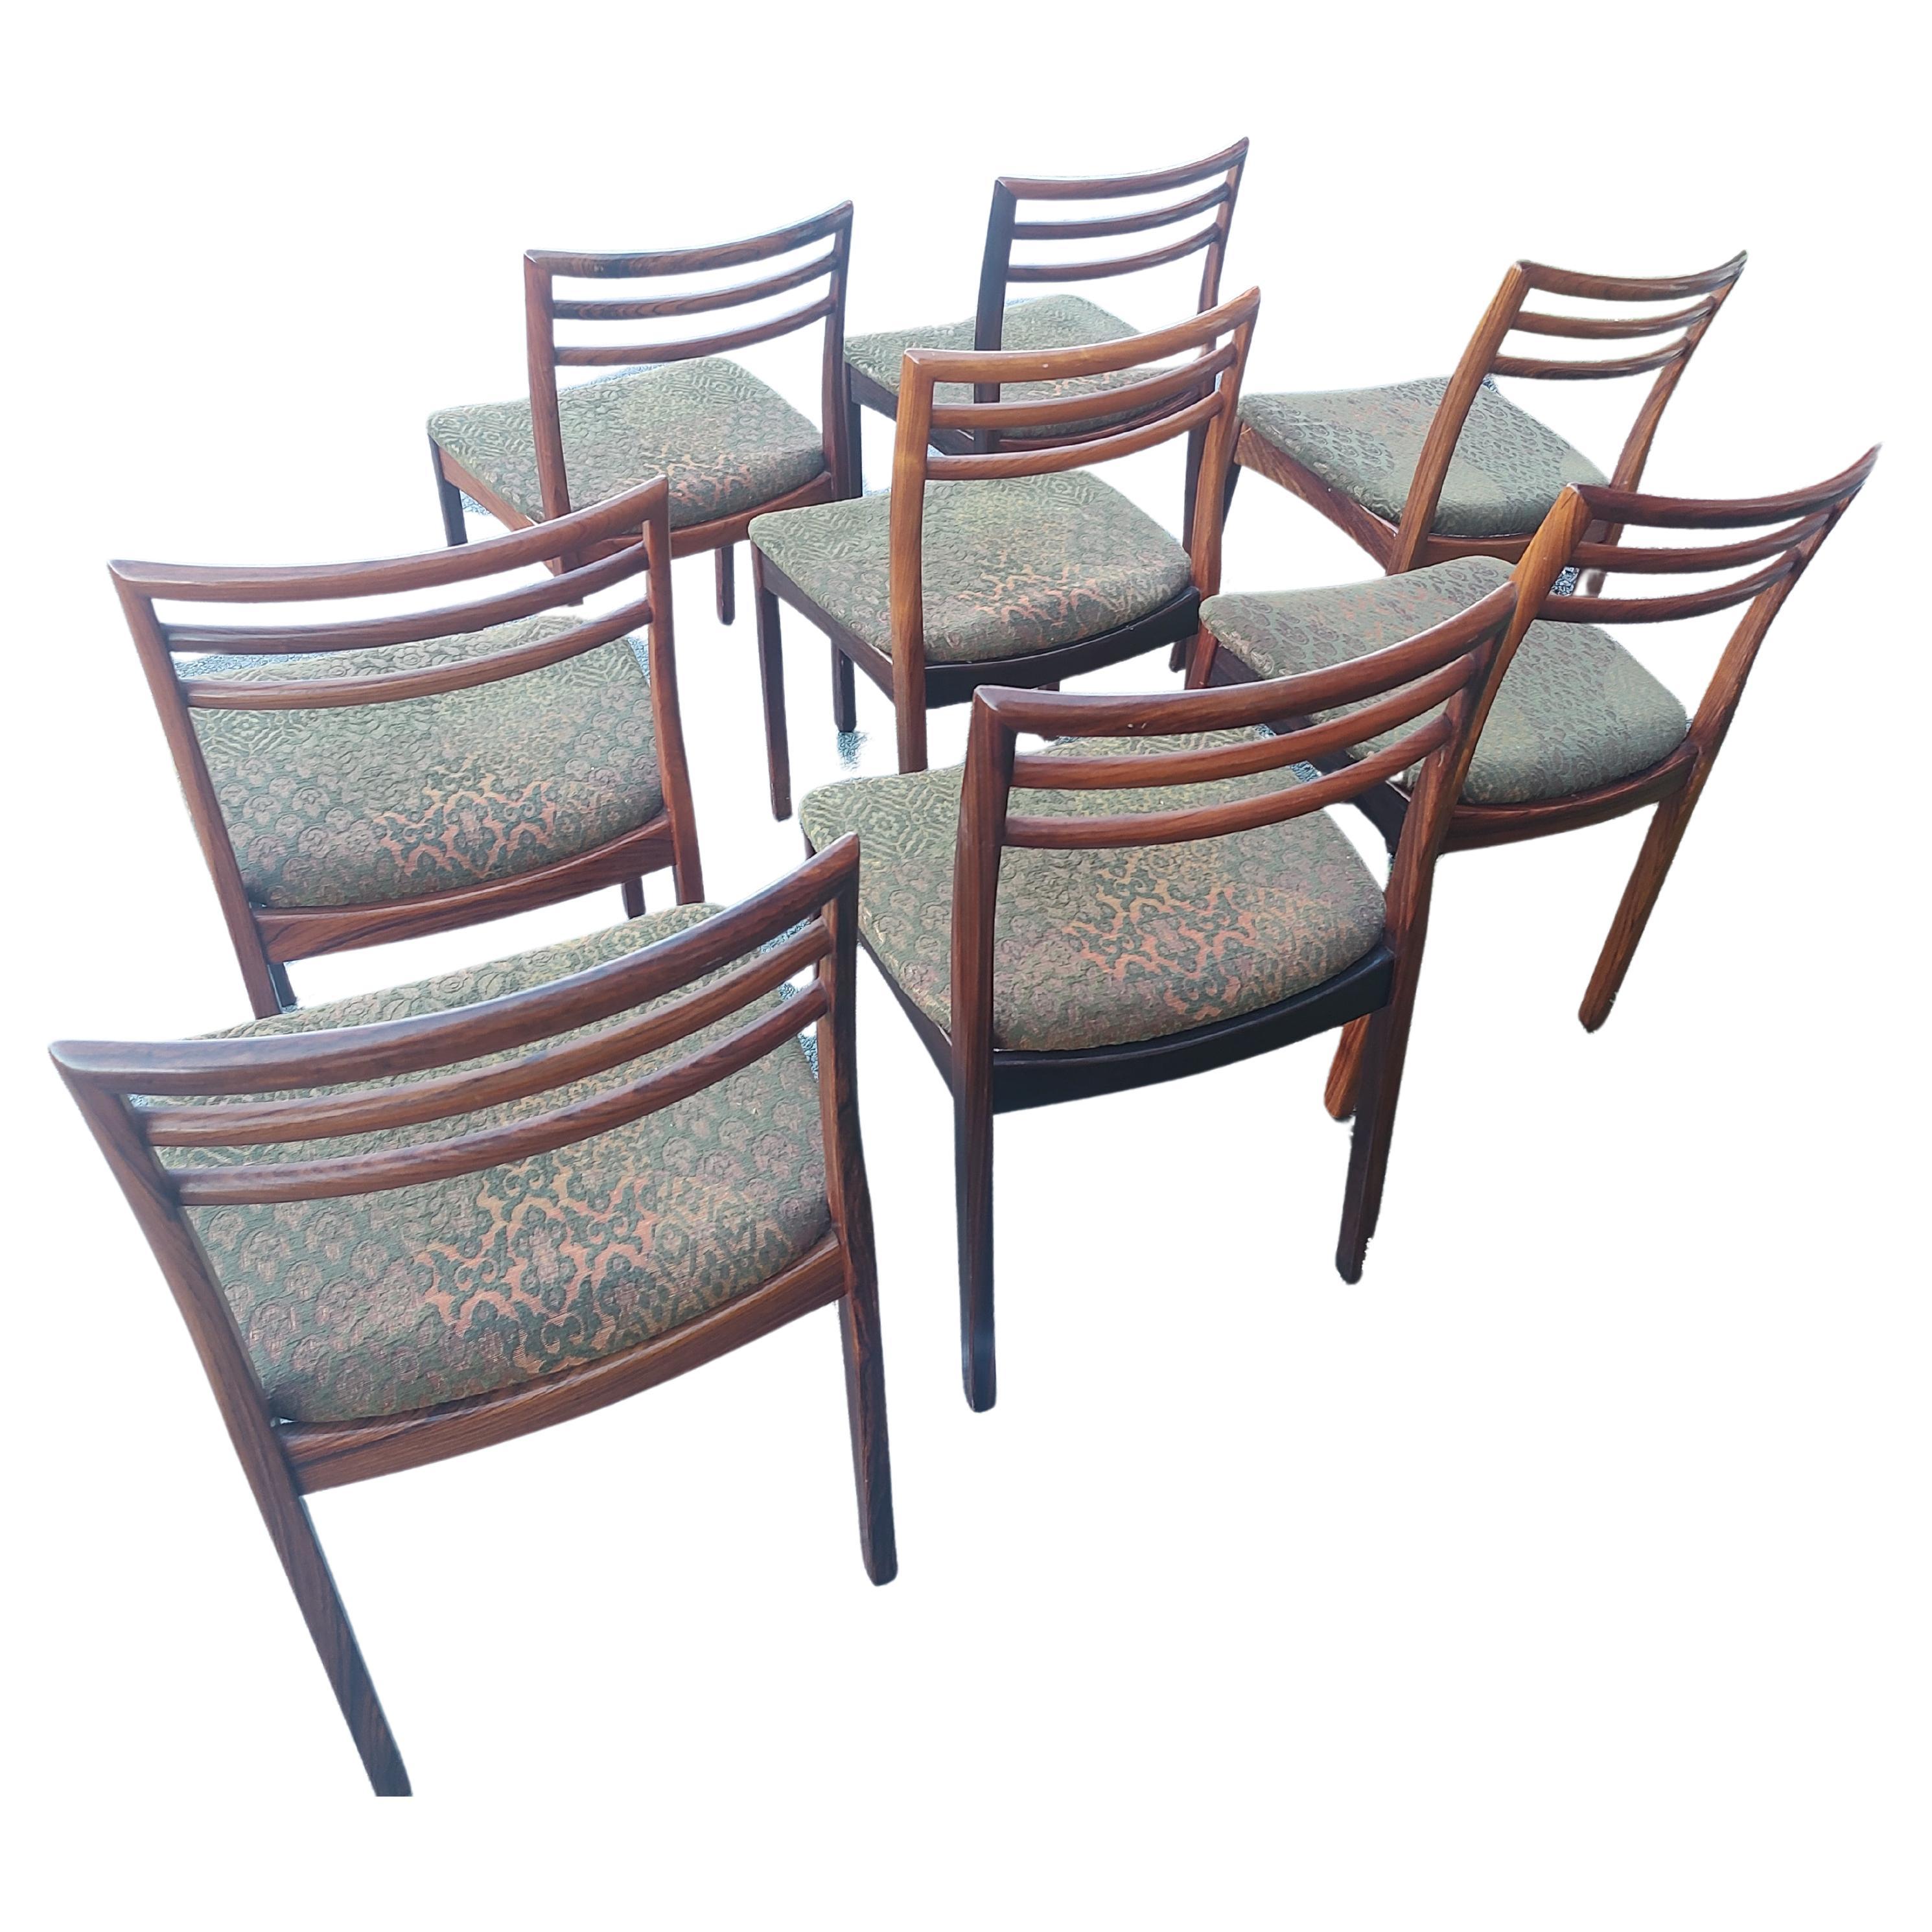 Fabulous set of 8 Rosewood Ladderback Dining chairs by Niels Otto Moeller. Spectacular graining in these Brazilian Rosewood chairs. Ladderback styling. Splines in joints on chair backs. Chairs have been well taken care of as they are in excellent